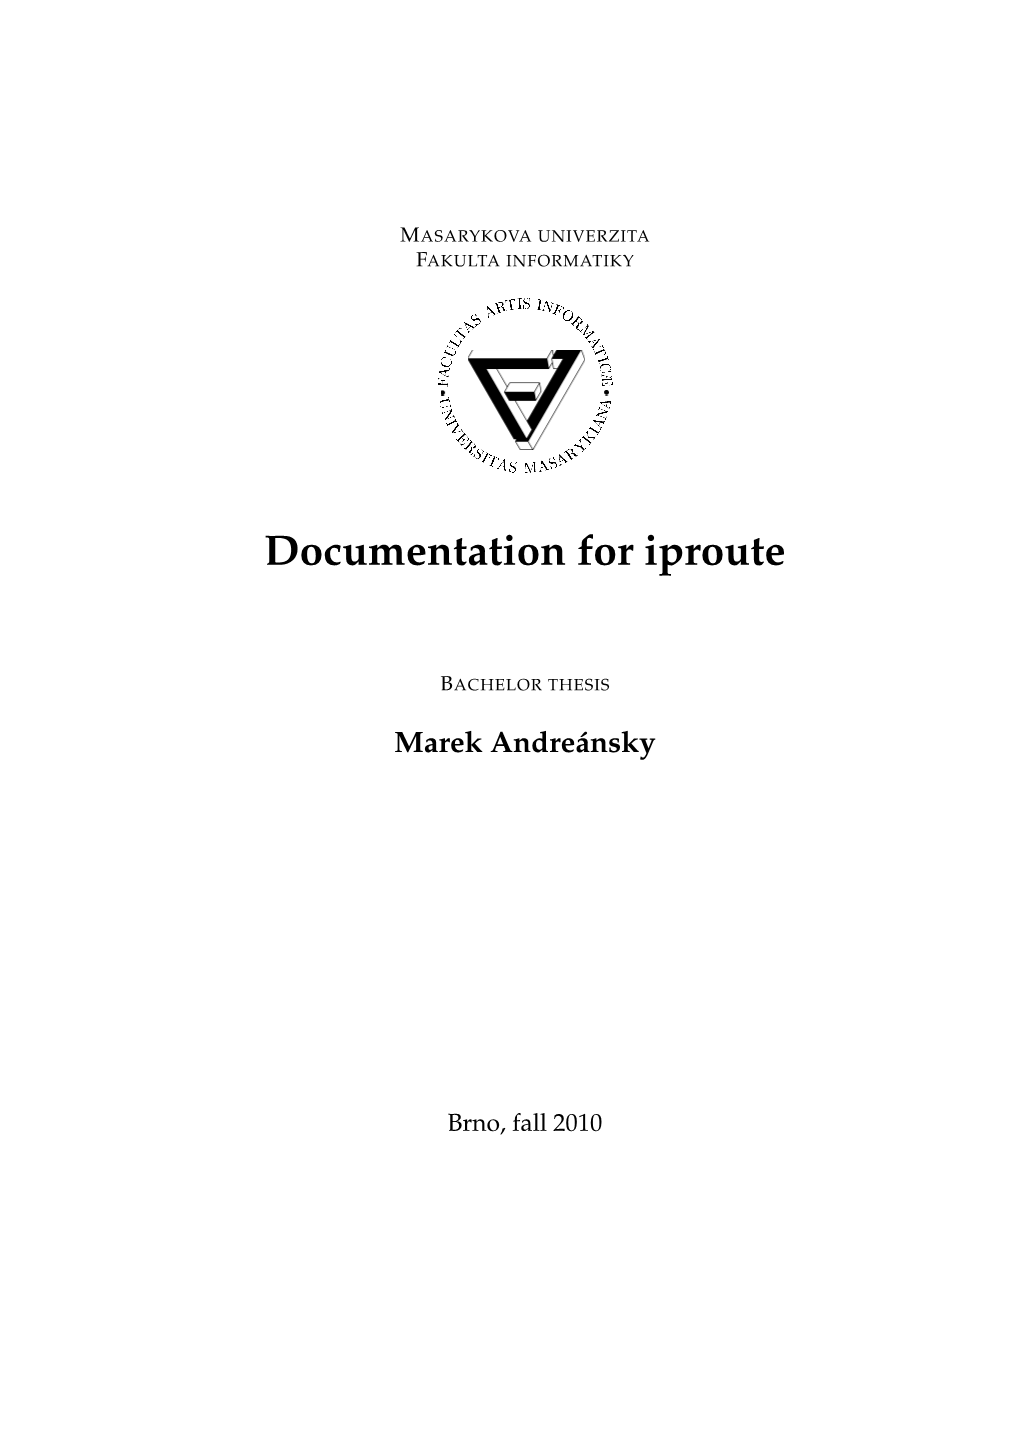 Documentation for Iproute